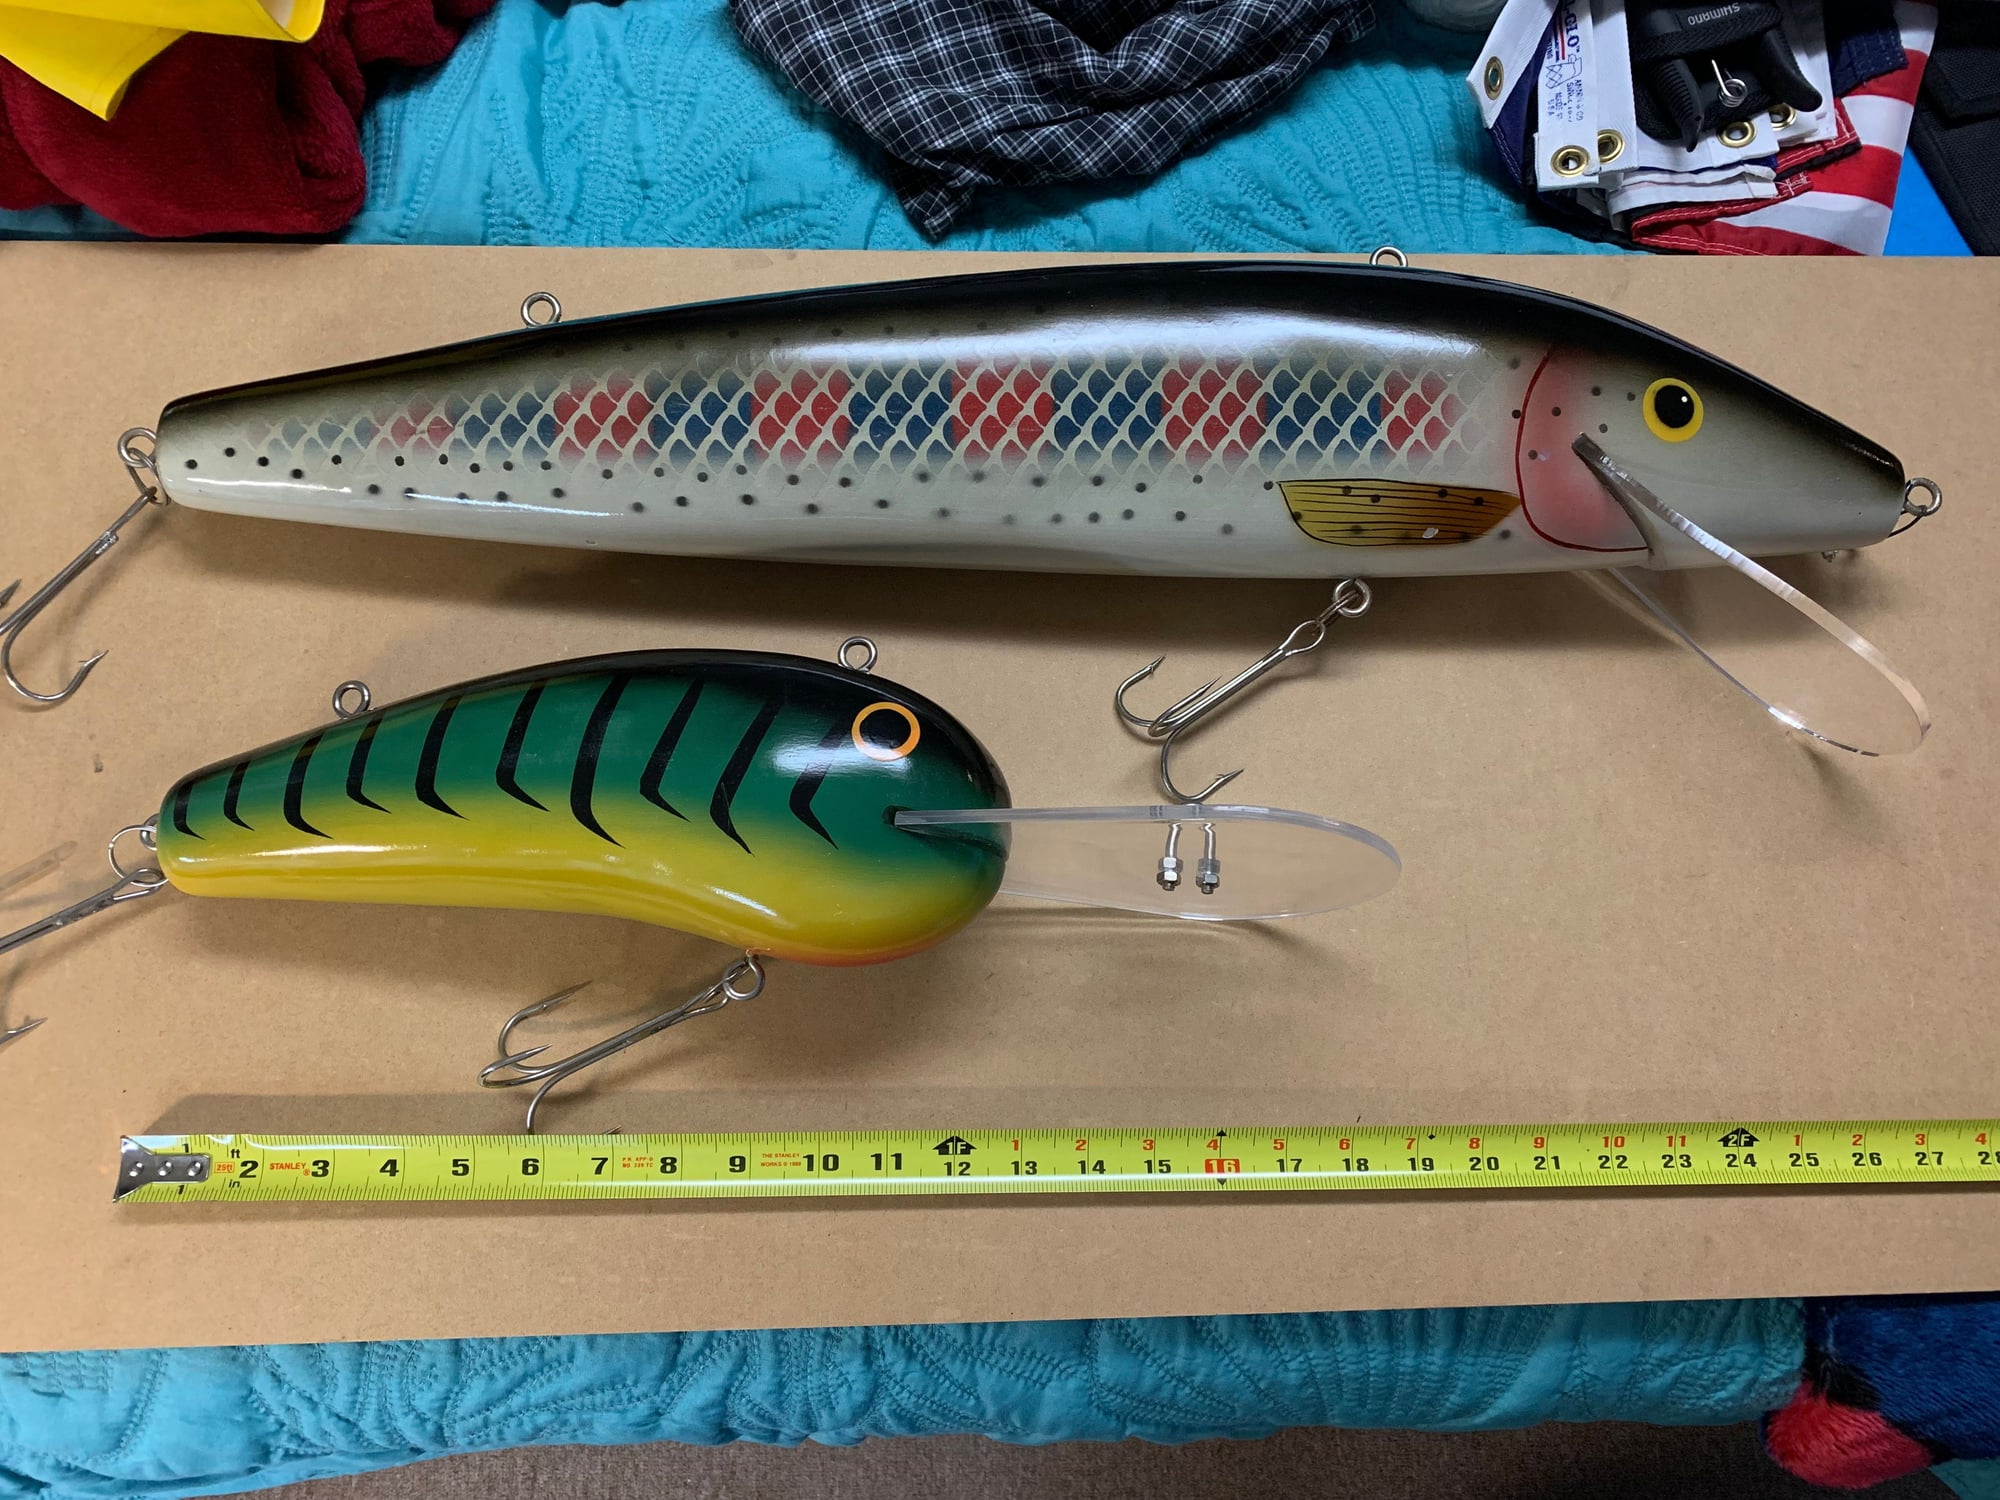 Giant Rapala Lure Bloodydecks, 54% OFF